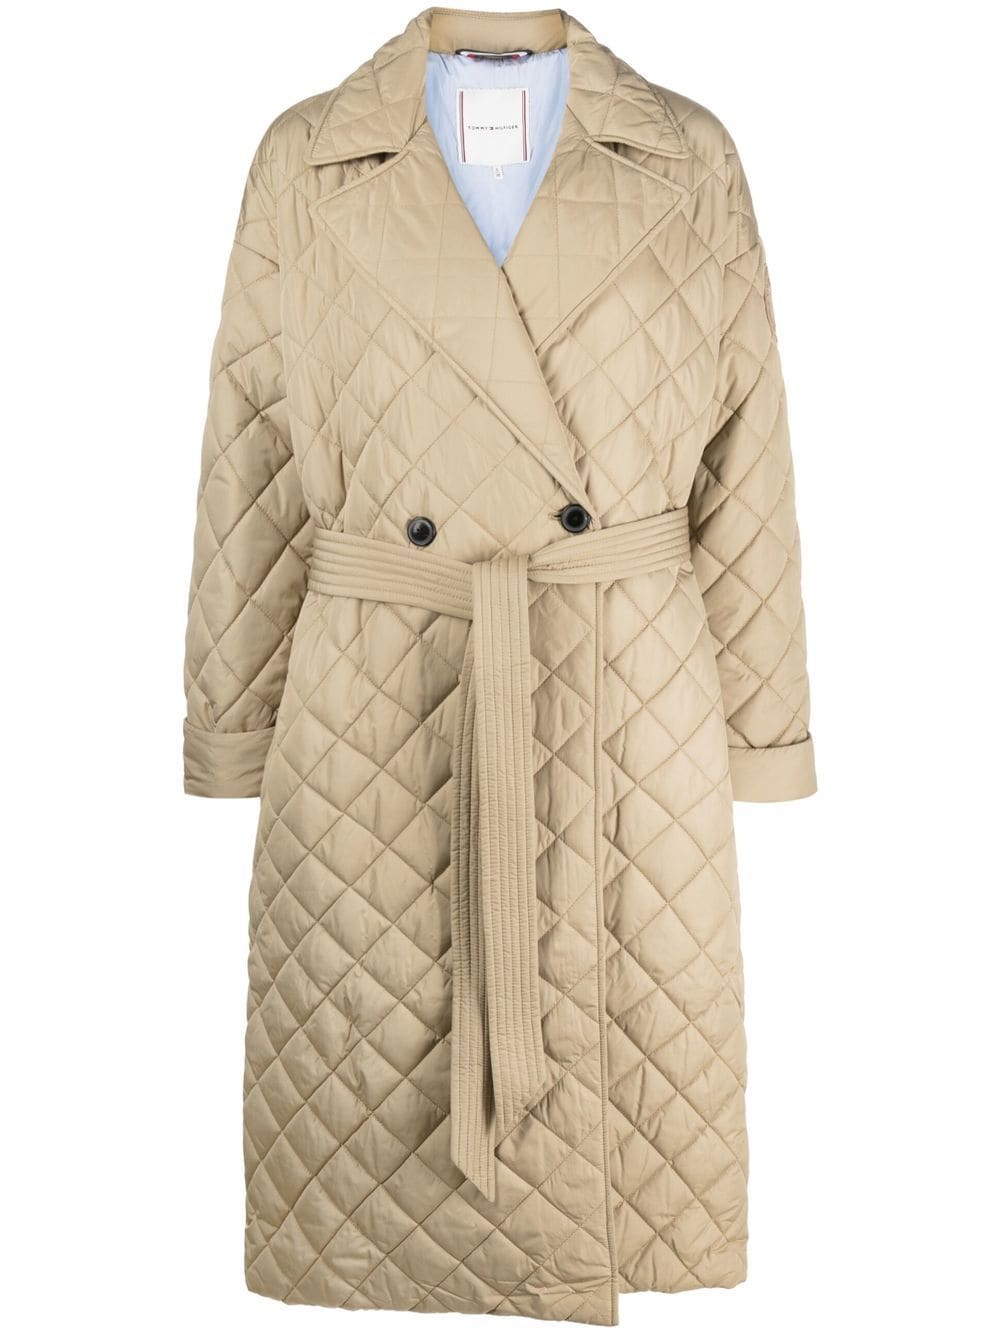 Tommy Hilfiger Sorona Quilted Belted Coat - Farfetch